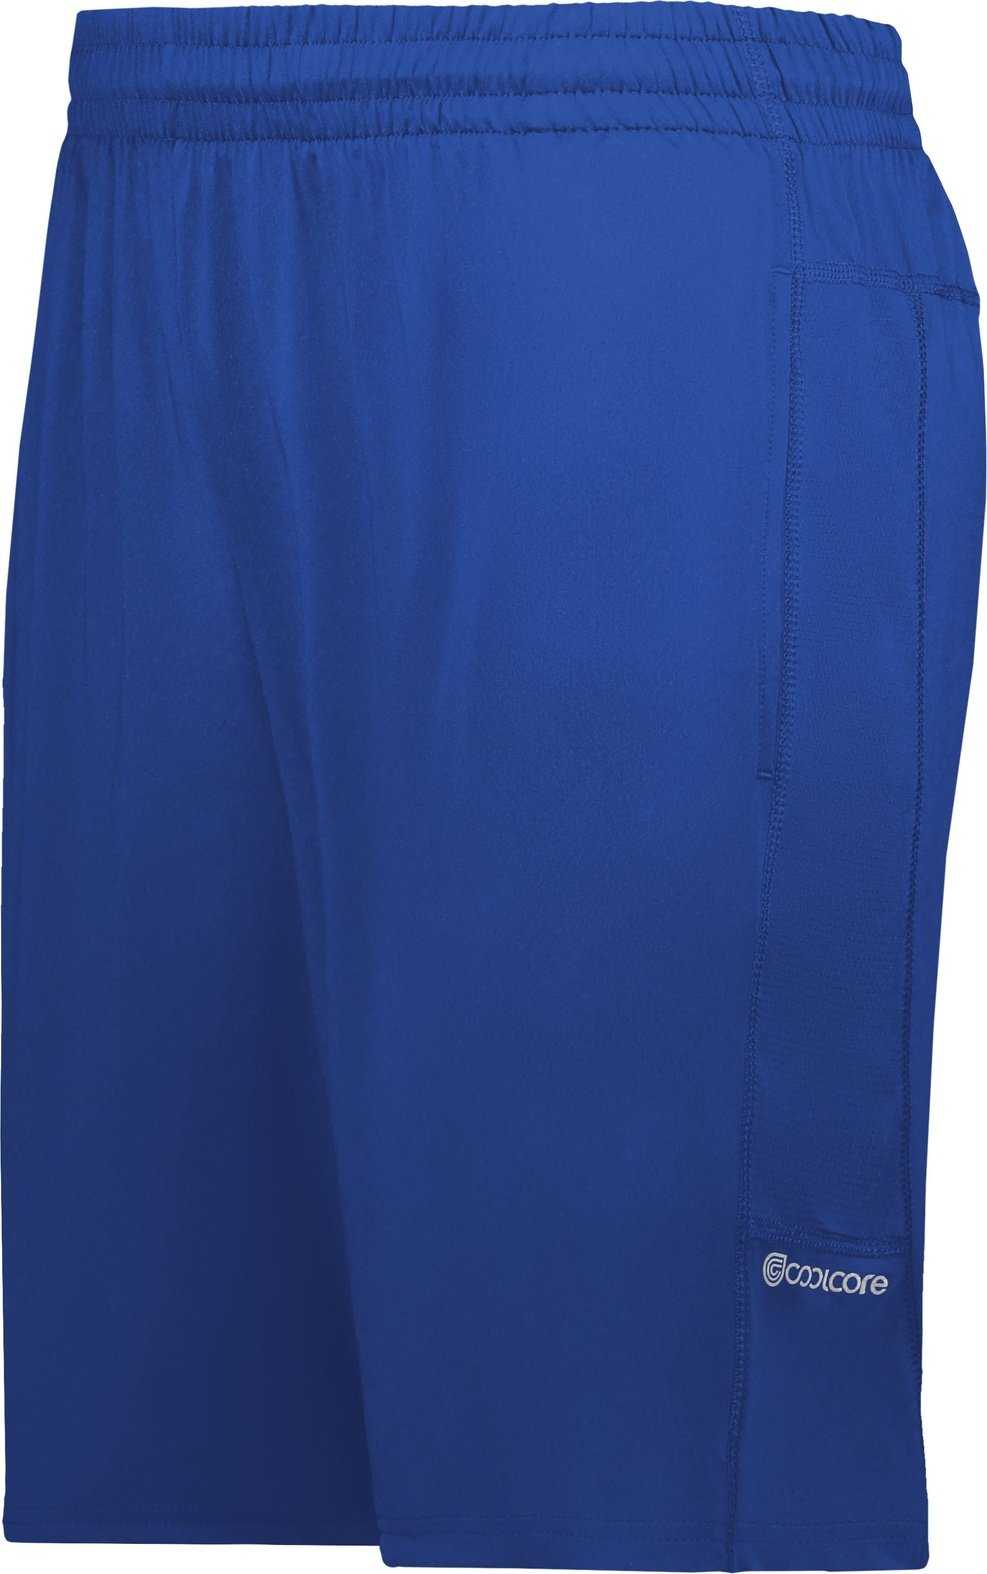 Holloway 222594 Coolcore Shorts - Royal - HIT a Double